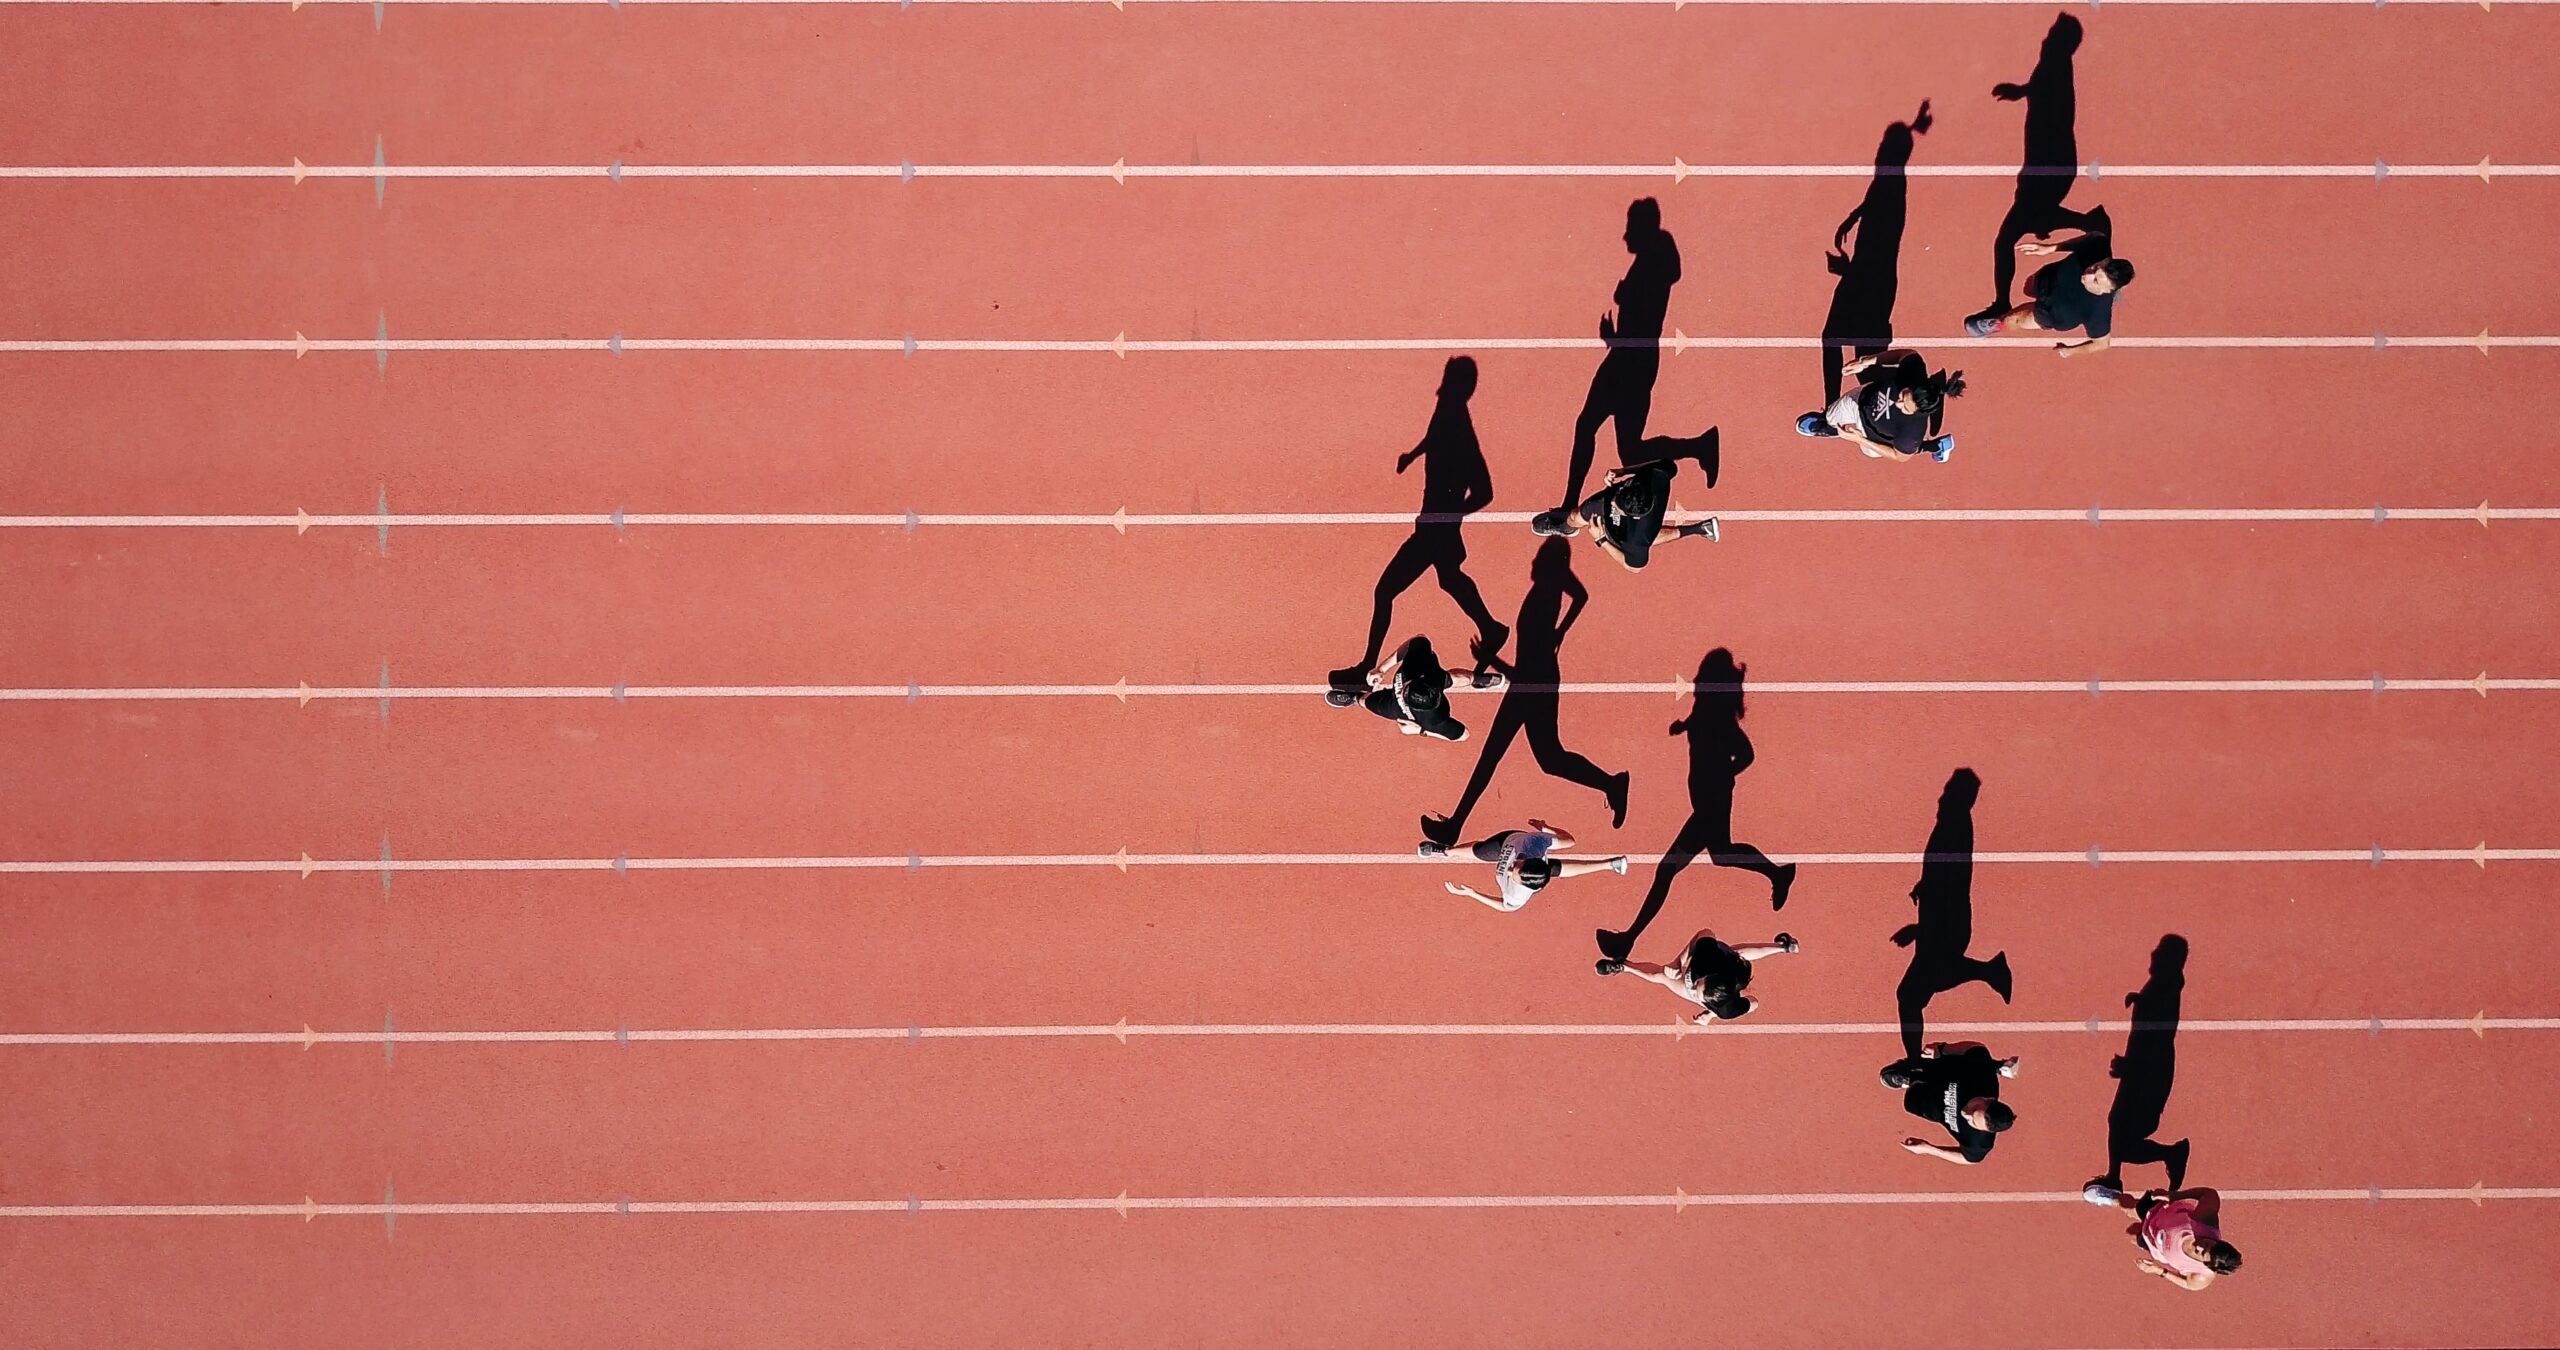 Top-down view of a group of people runnning in a running track